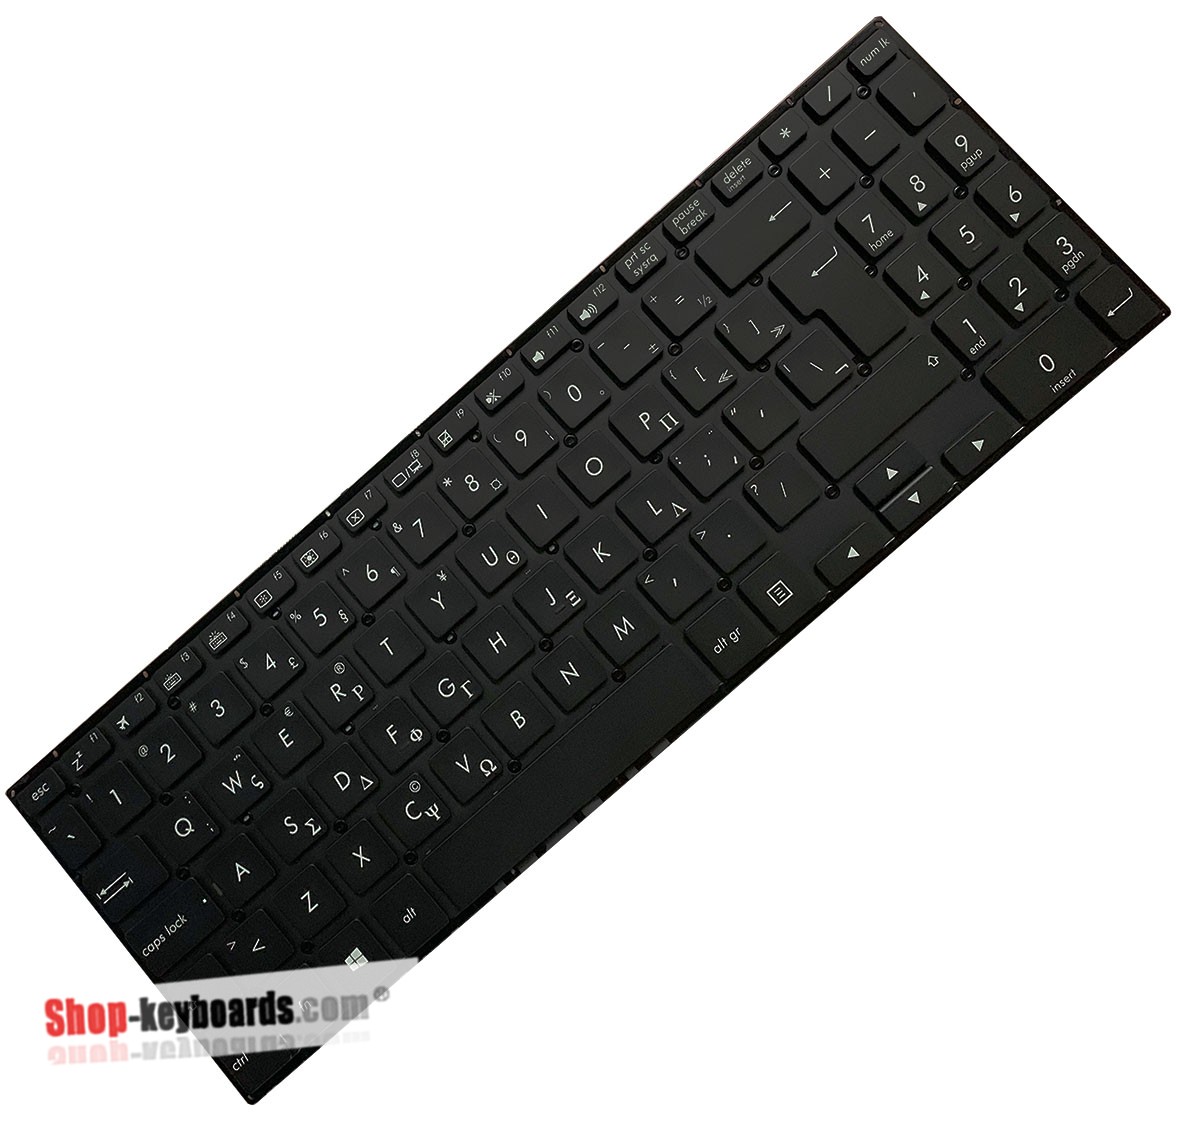 Asus 0KNB0-5630SP00 Keyboard replacement